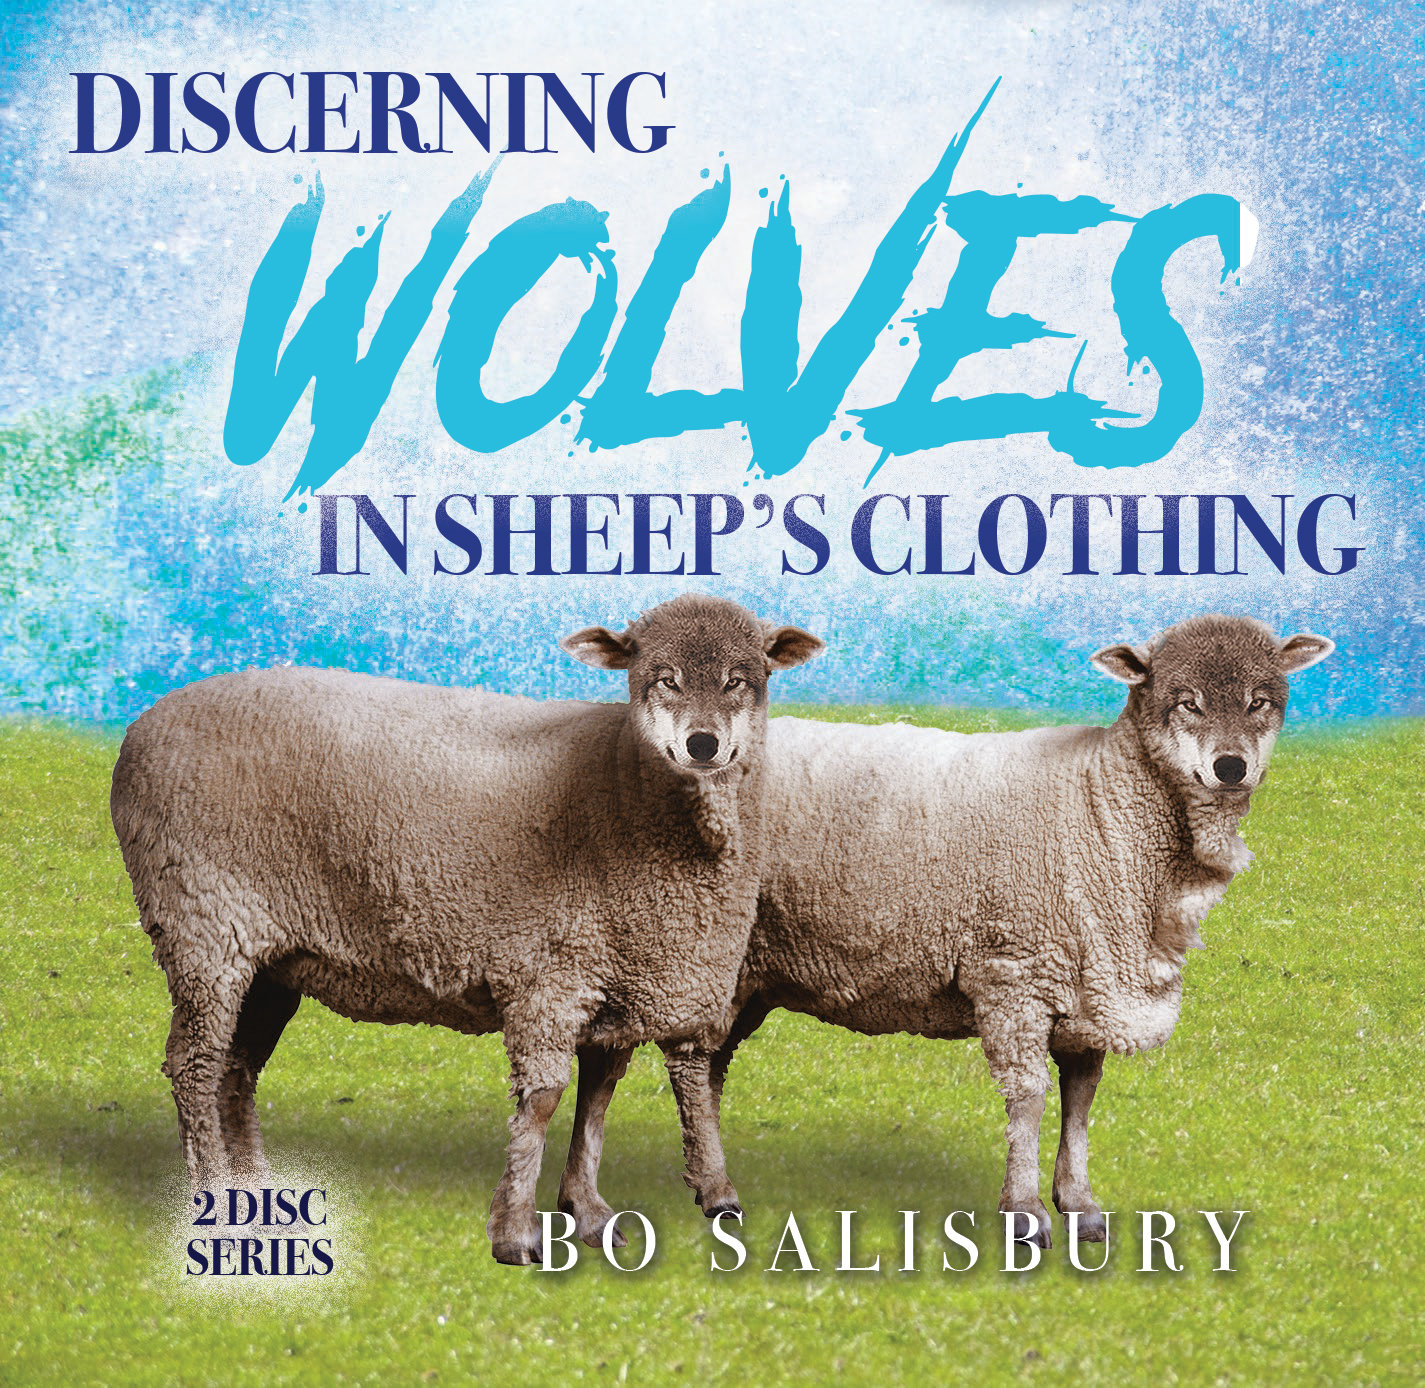 Discerning Wolves in Sheep’s Clothing (MP3 download)